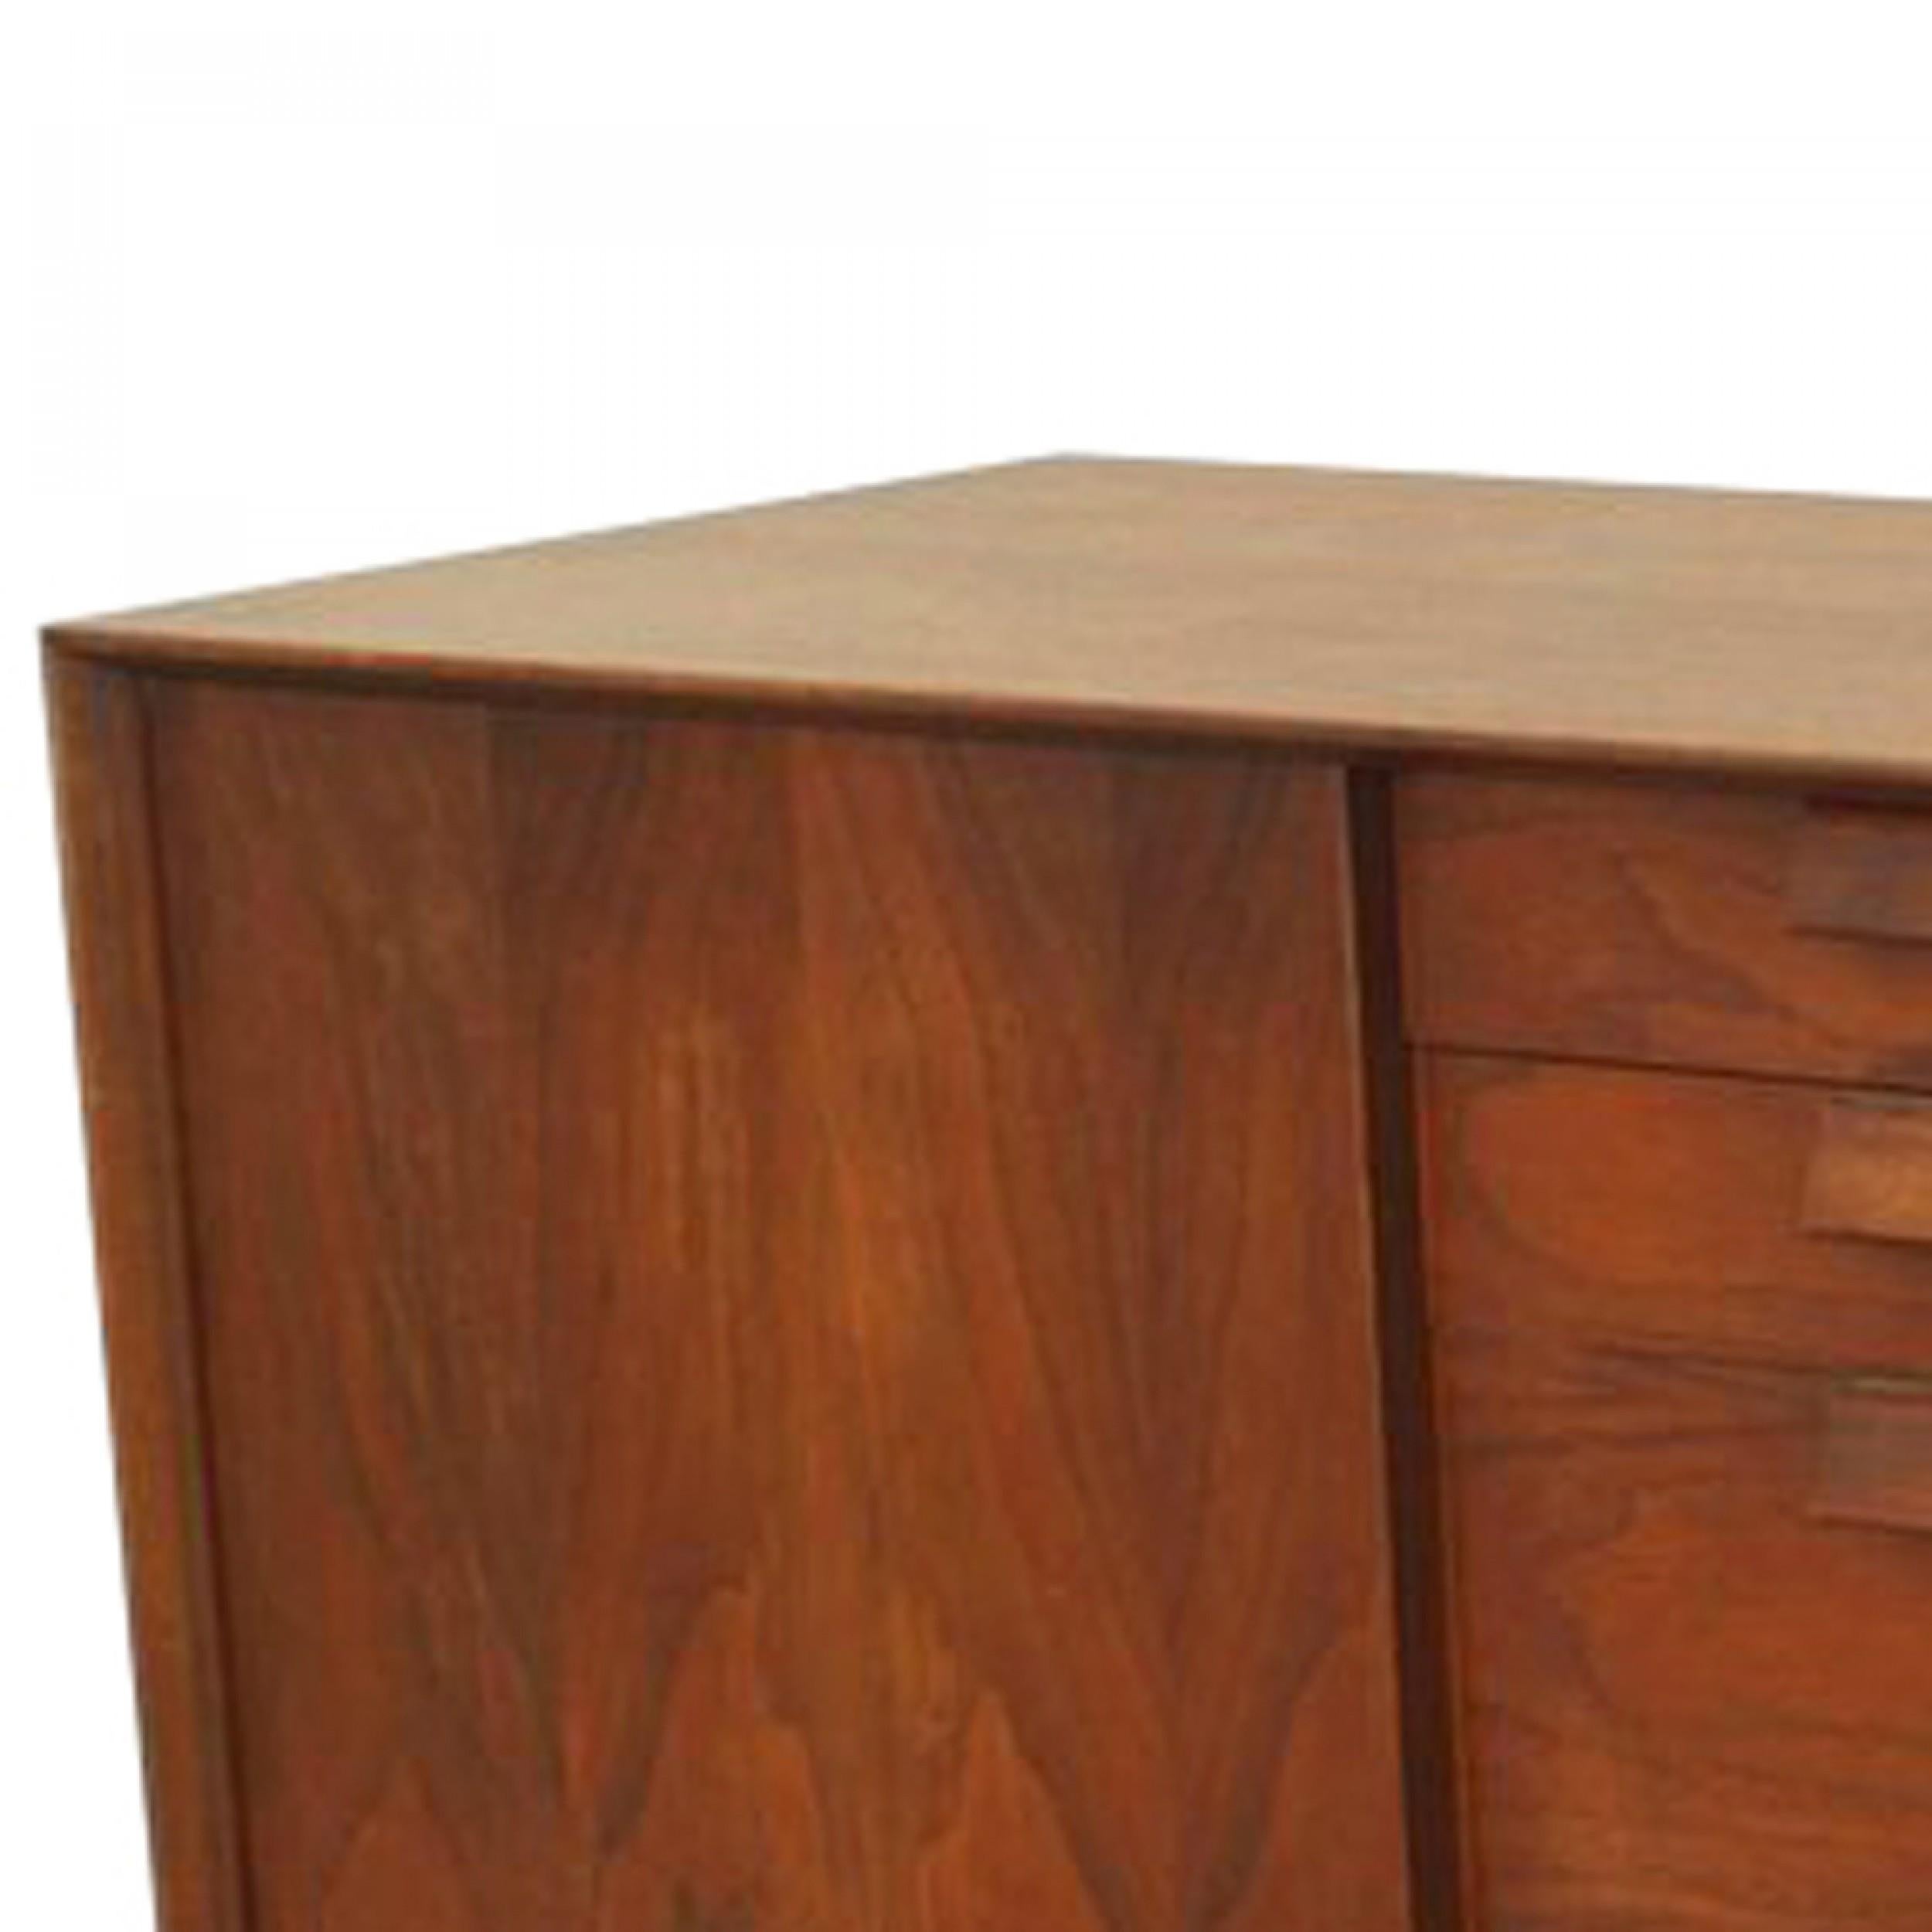 Jens Risom Danish Post-War Teak Credenza Sideboard In Good Condition For Sale In New York, NY